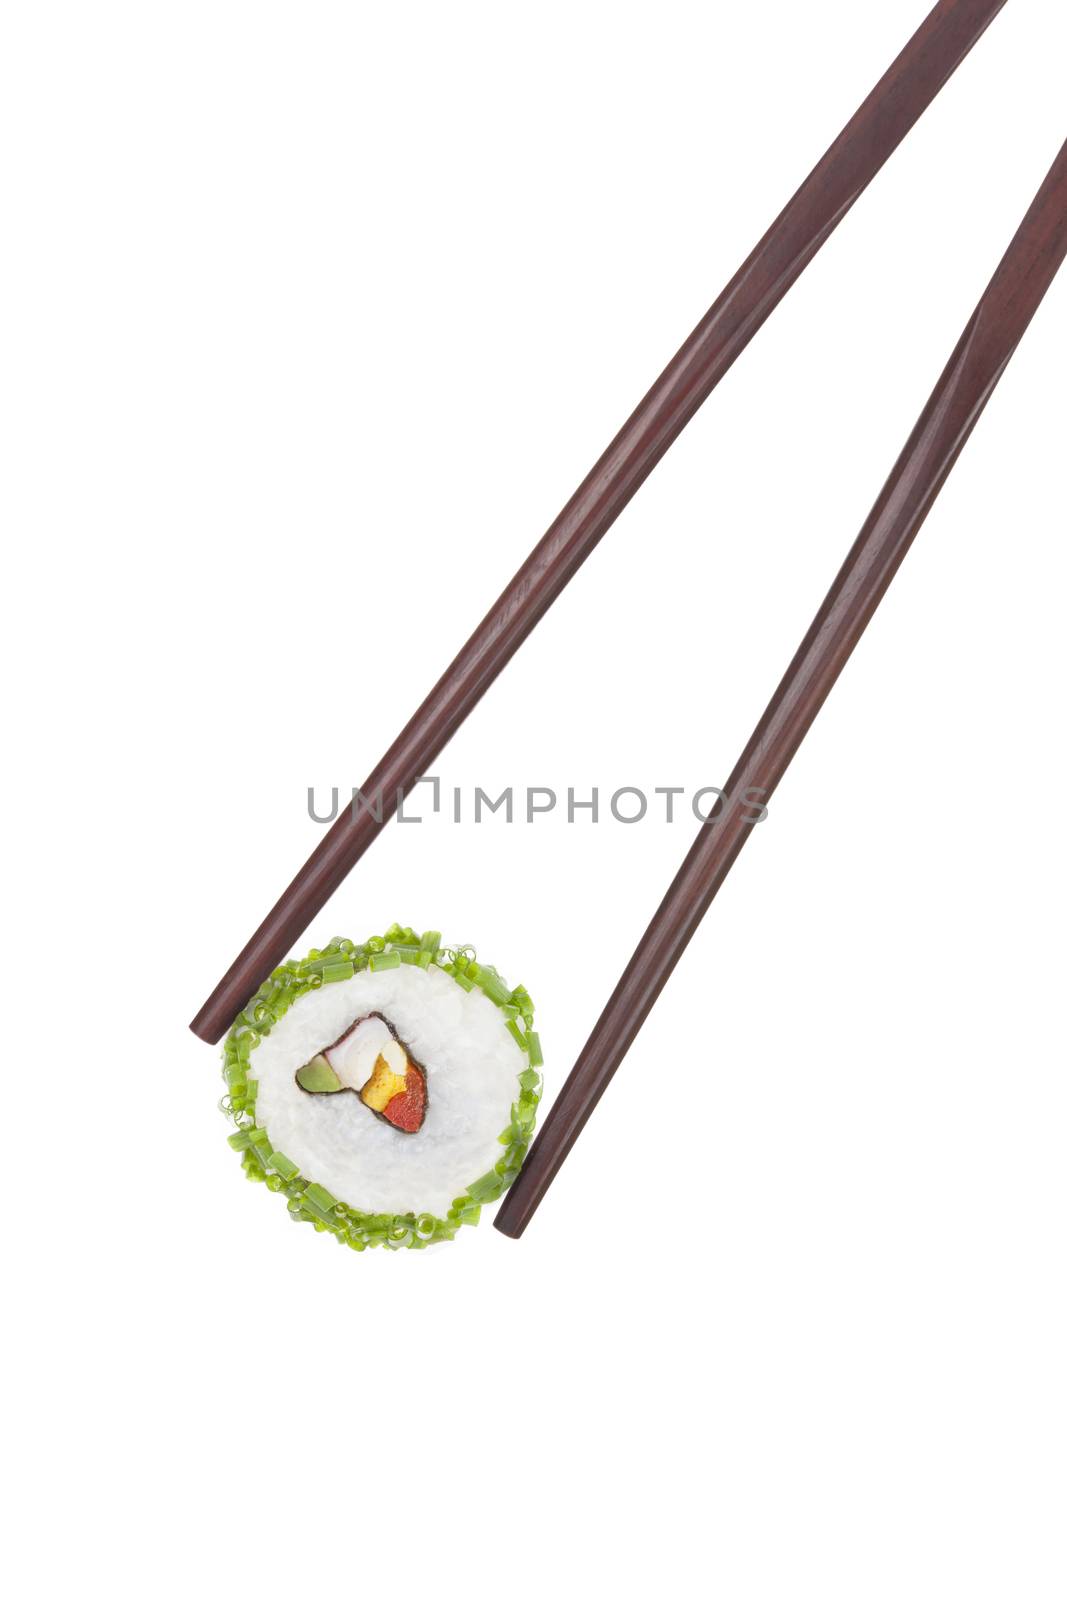 Holding a california maki sushi piece with chopped chive in chopsticks isolated on white background. Culinary gourmet japanese food. 